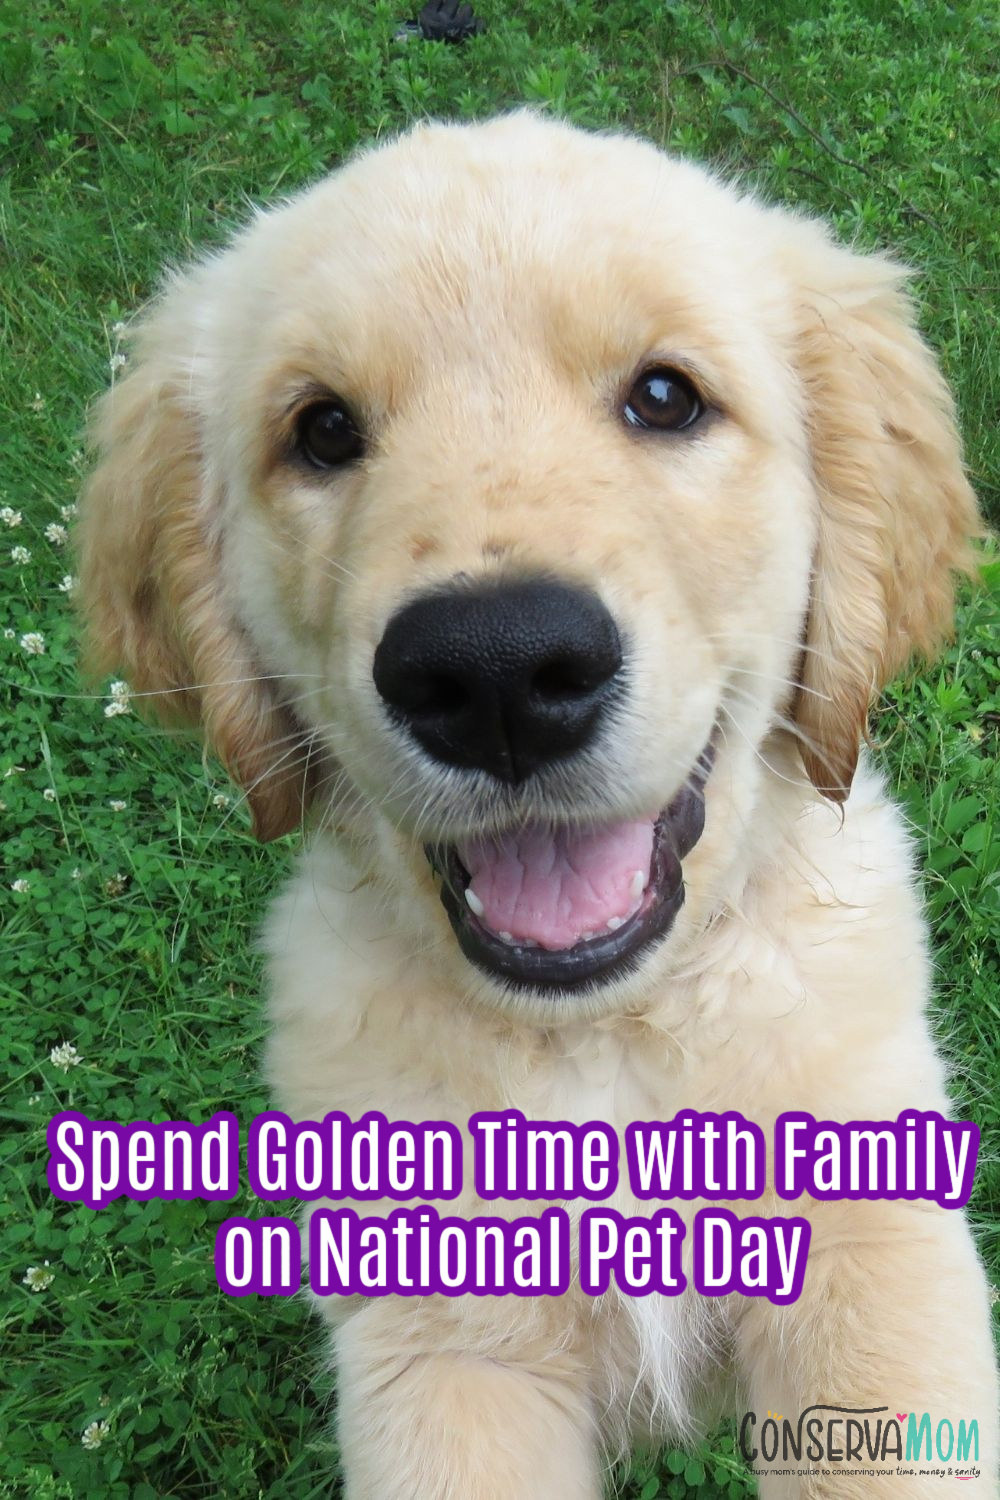 Spend Golden Time with Family on National Pet Day